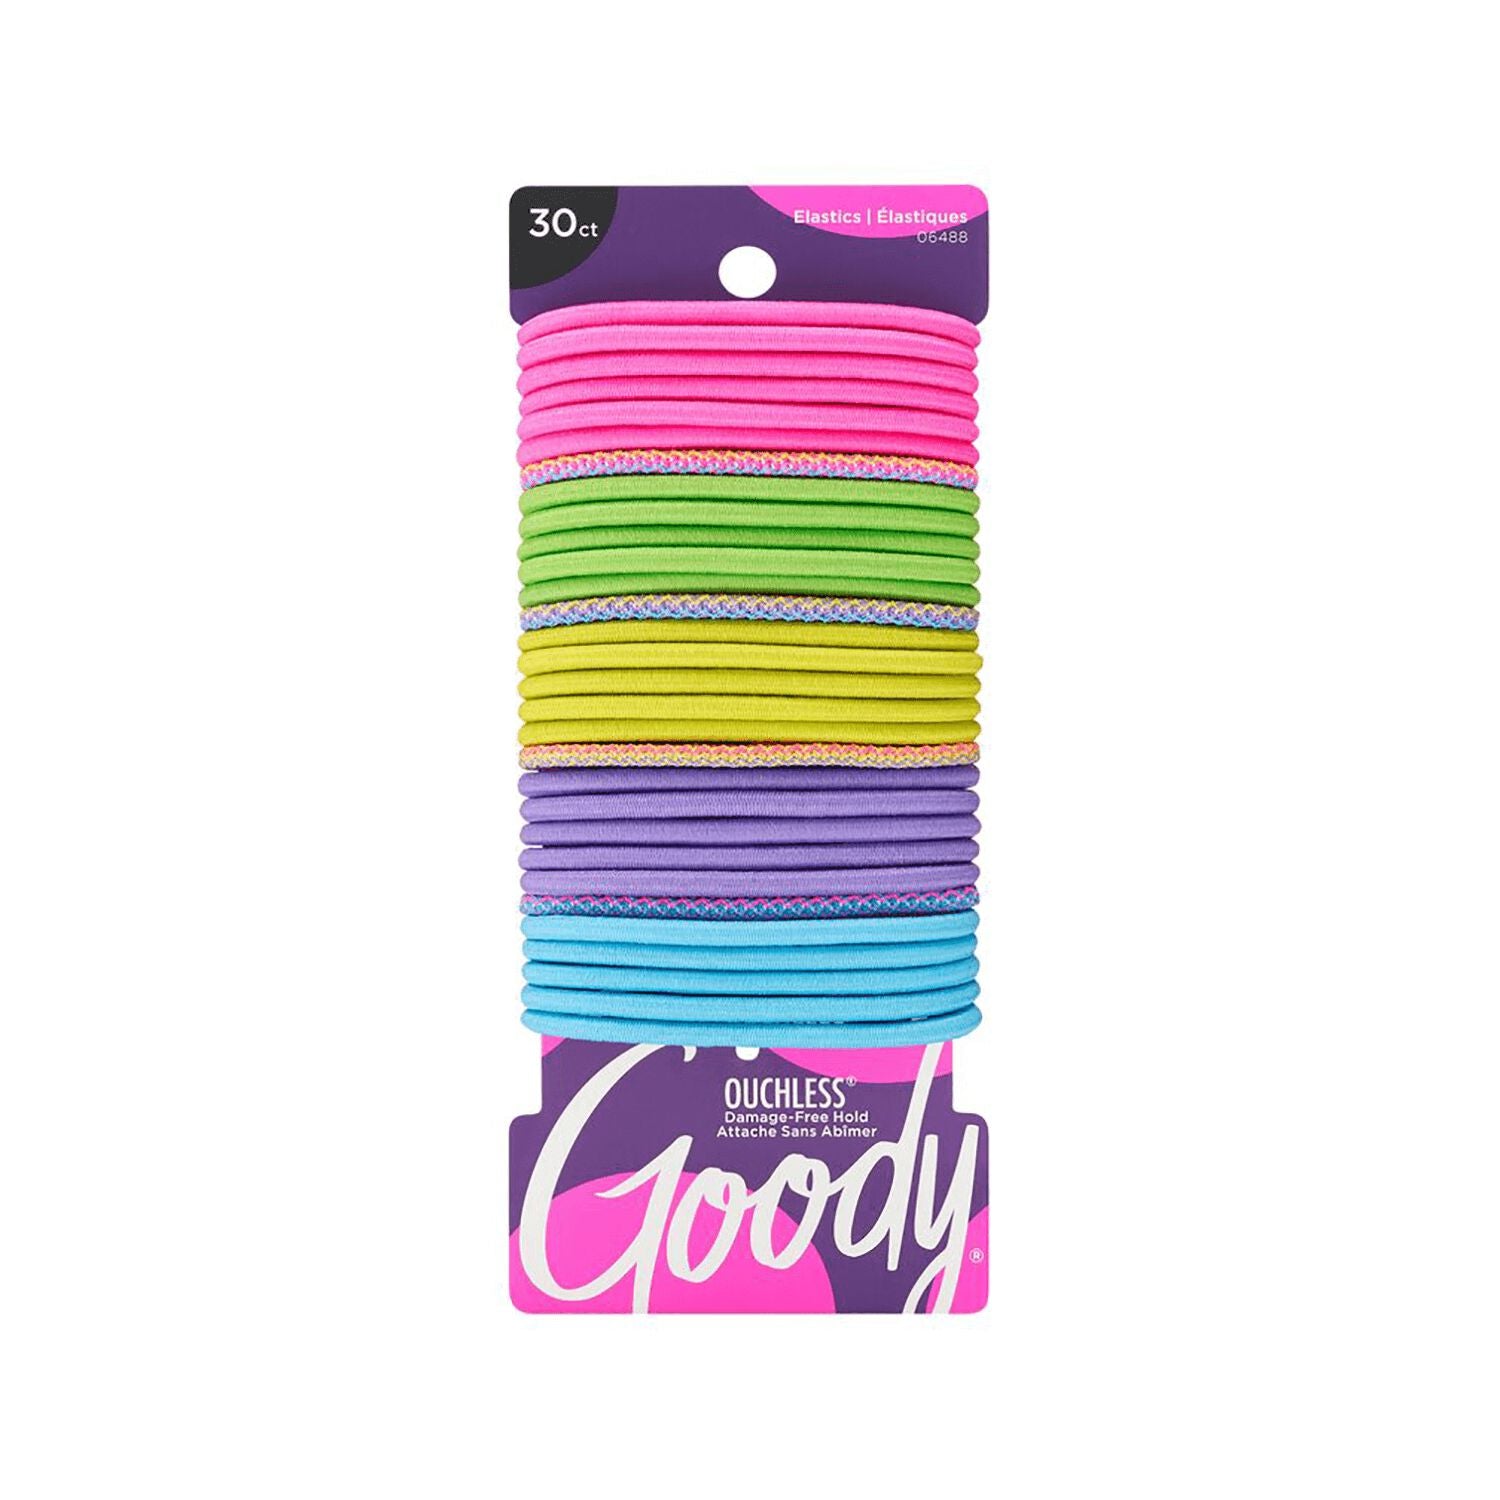 1399  by   Goody Ouchless Neon Elastics 15 Count